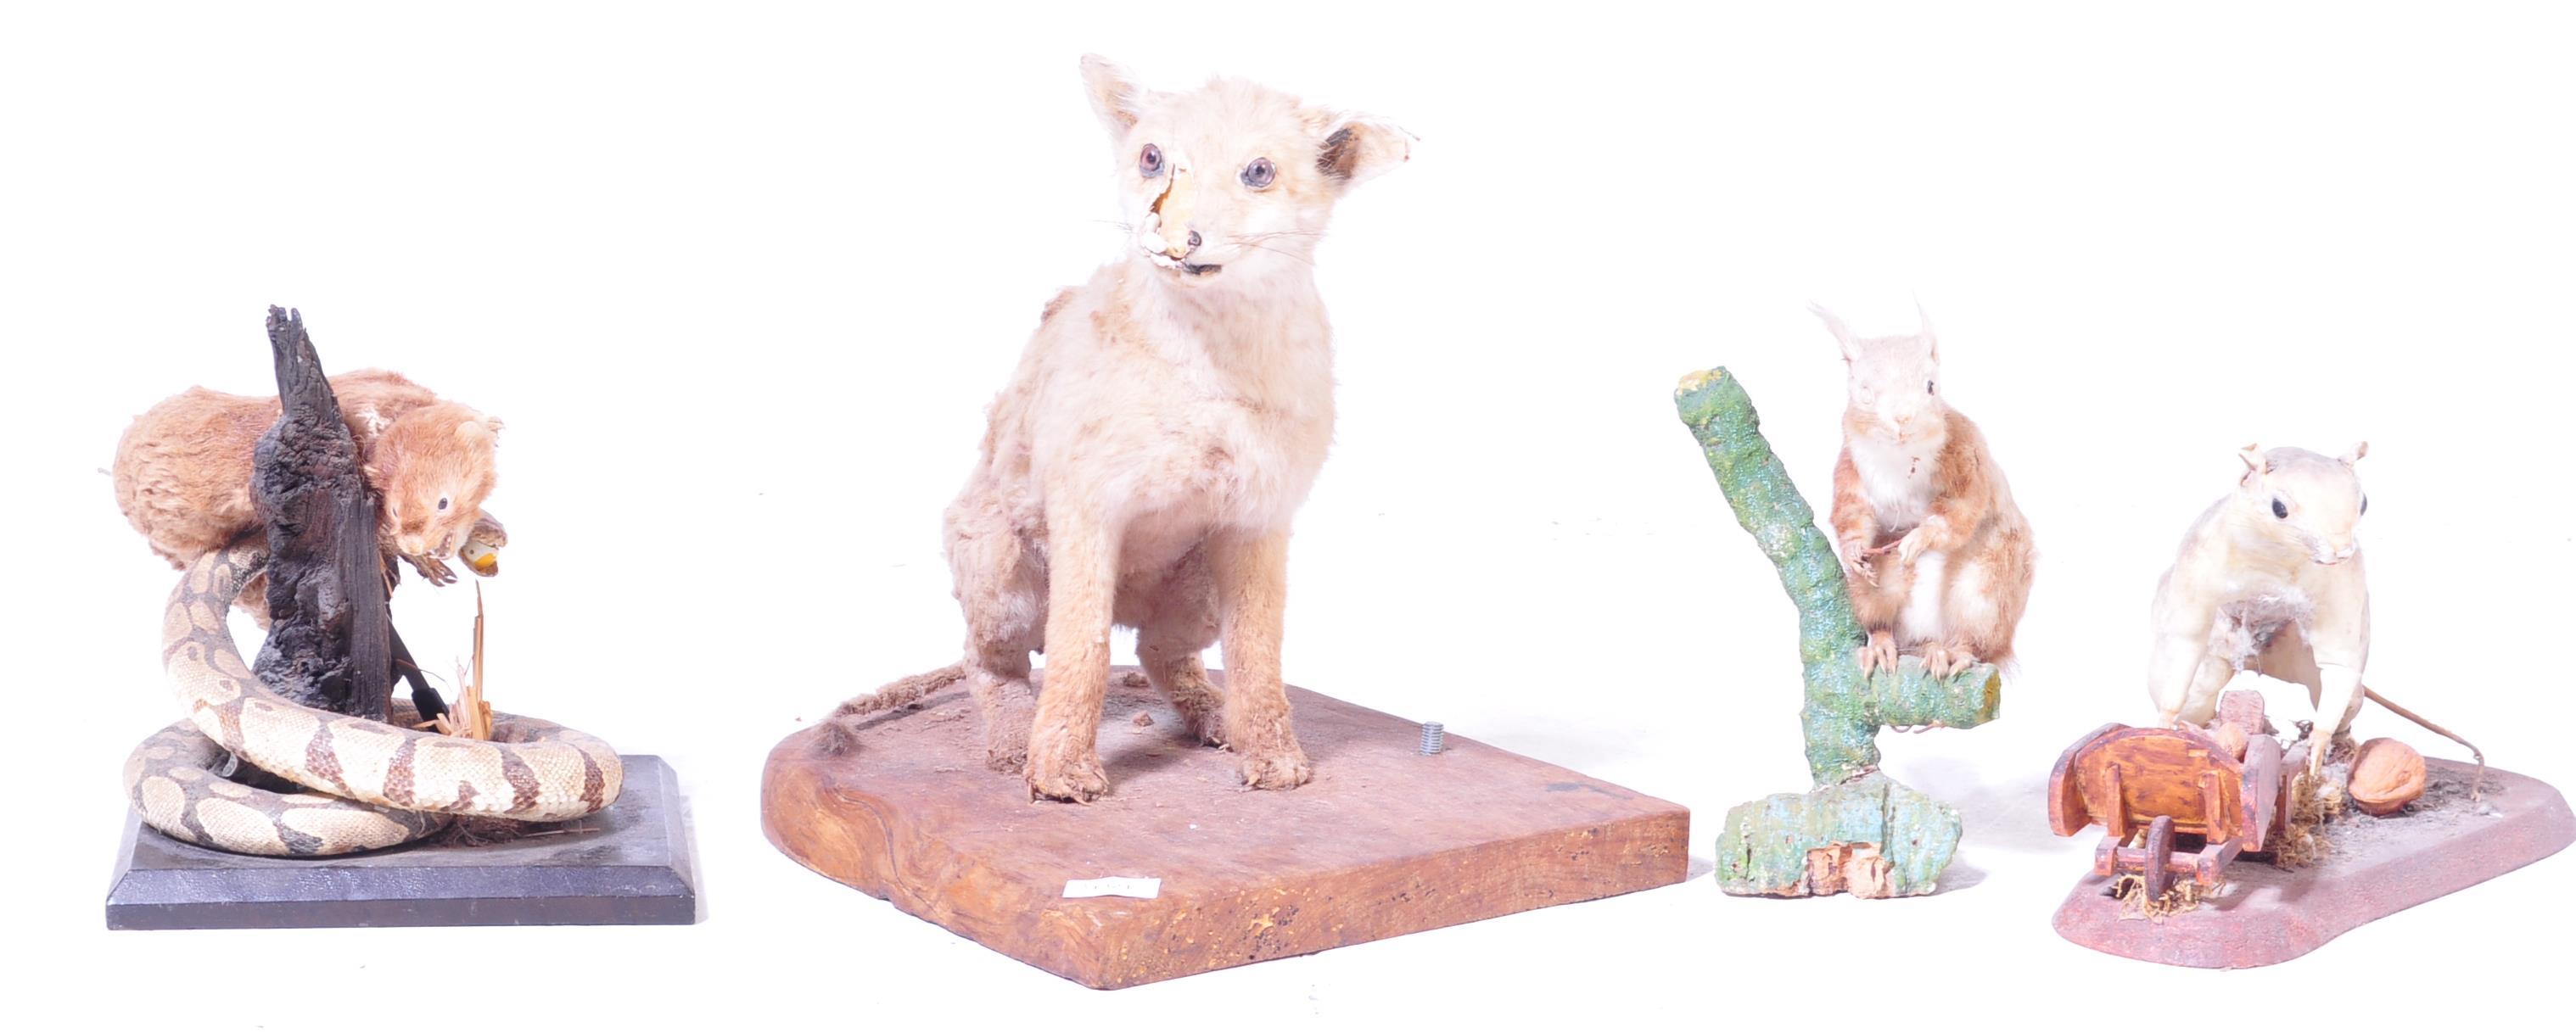 OF TAXIDERMY INTEREST - COLLECTION OF 20TH CENTURY TAXIDERMY